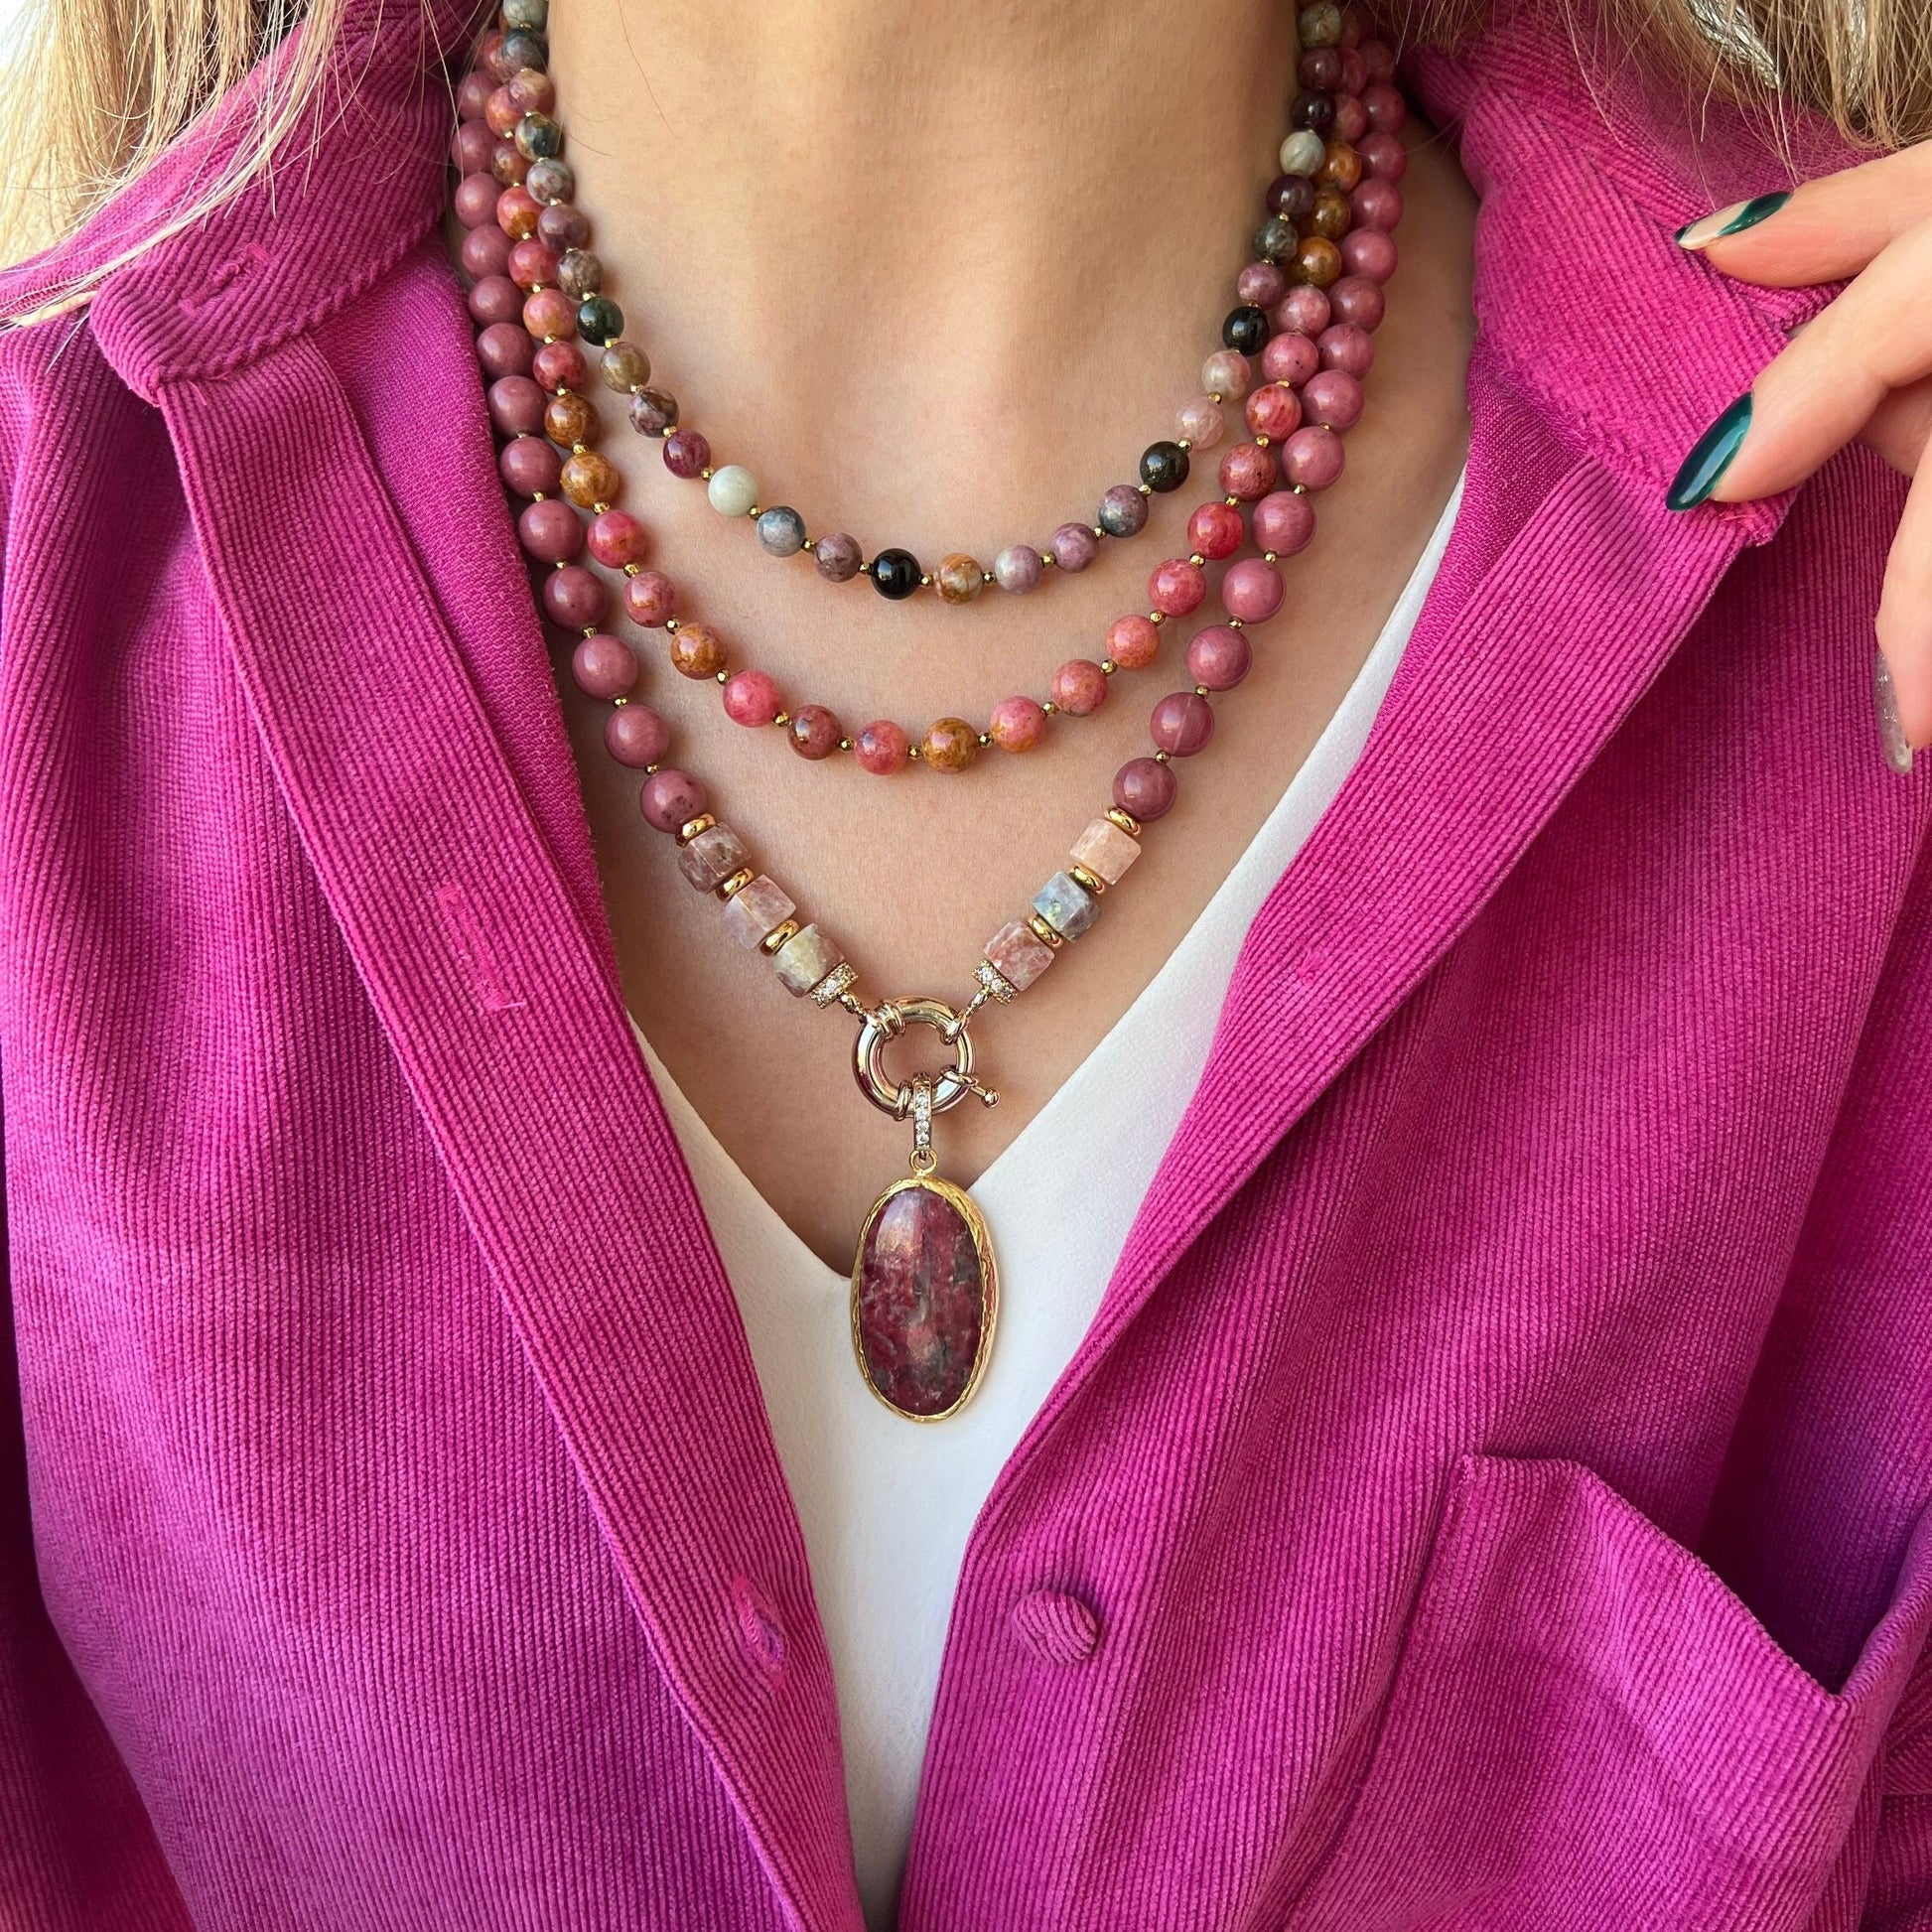 Gemstone Necklace, Pink Handmade Jewelry, Beaded Rhodonite and Tourmaline Necklace